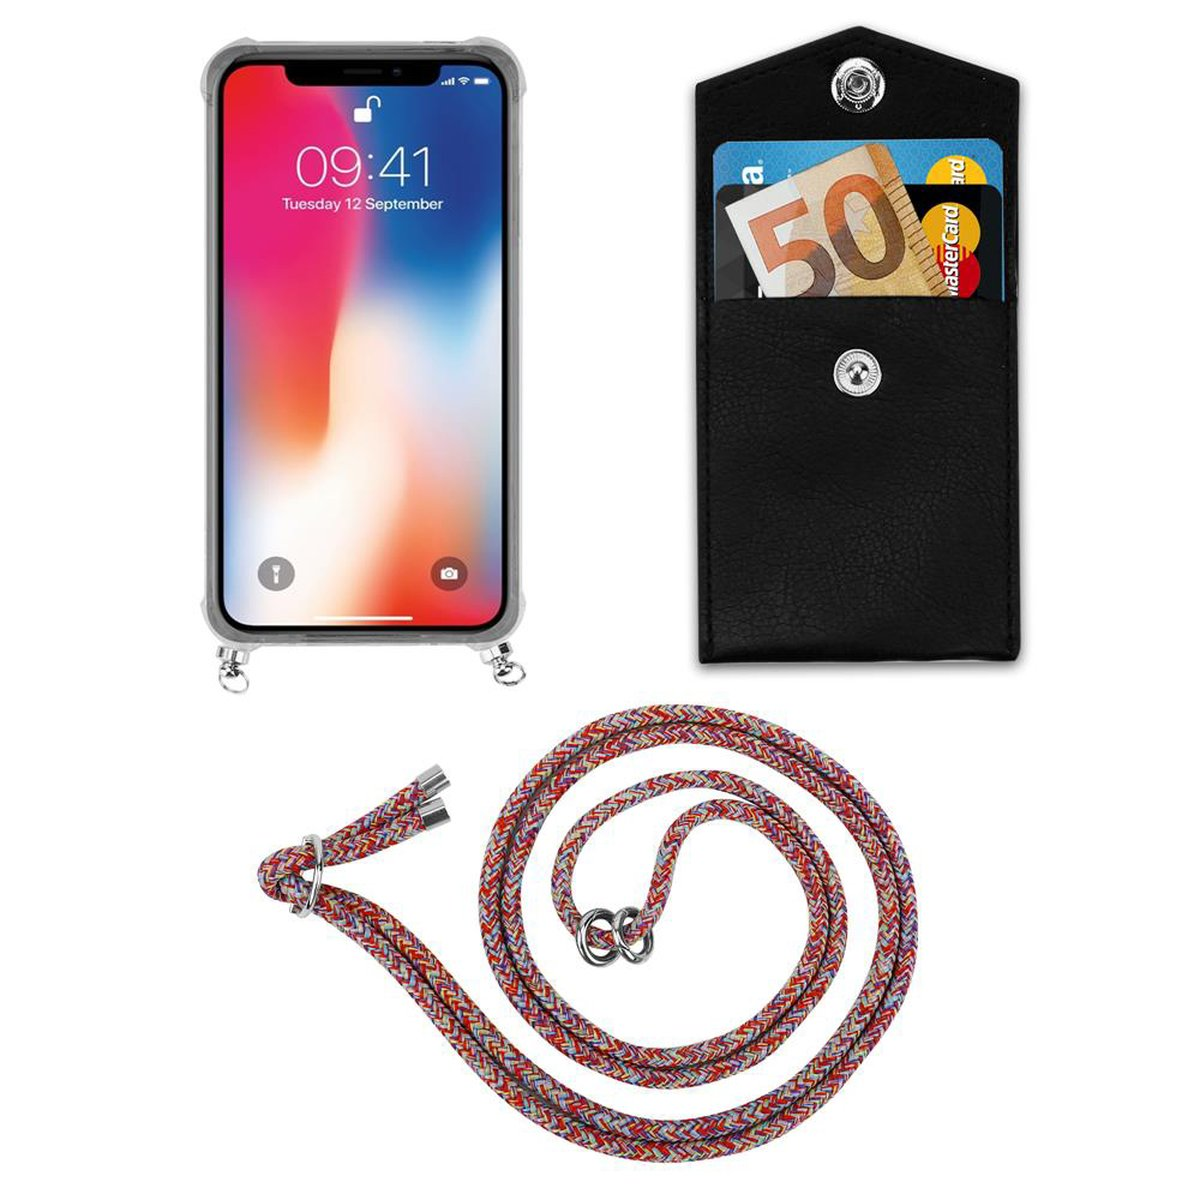 / Silber abnehmbarer X Backcover, COLORFUL mit Apple, Kordel Handy iPhone CADORABO Hülle, Ringen, XS, Kette PARROT Band und